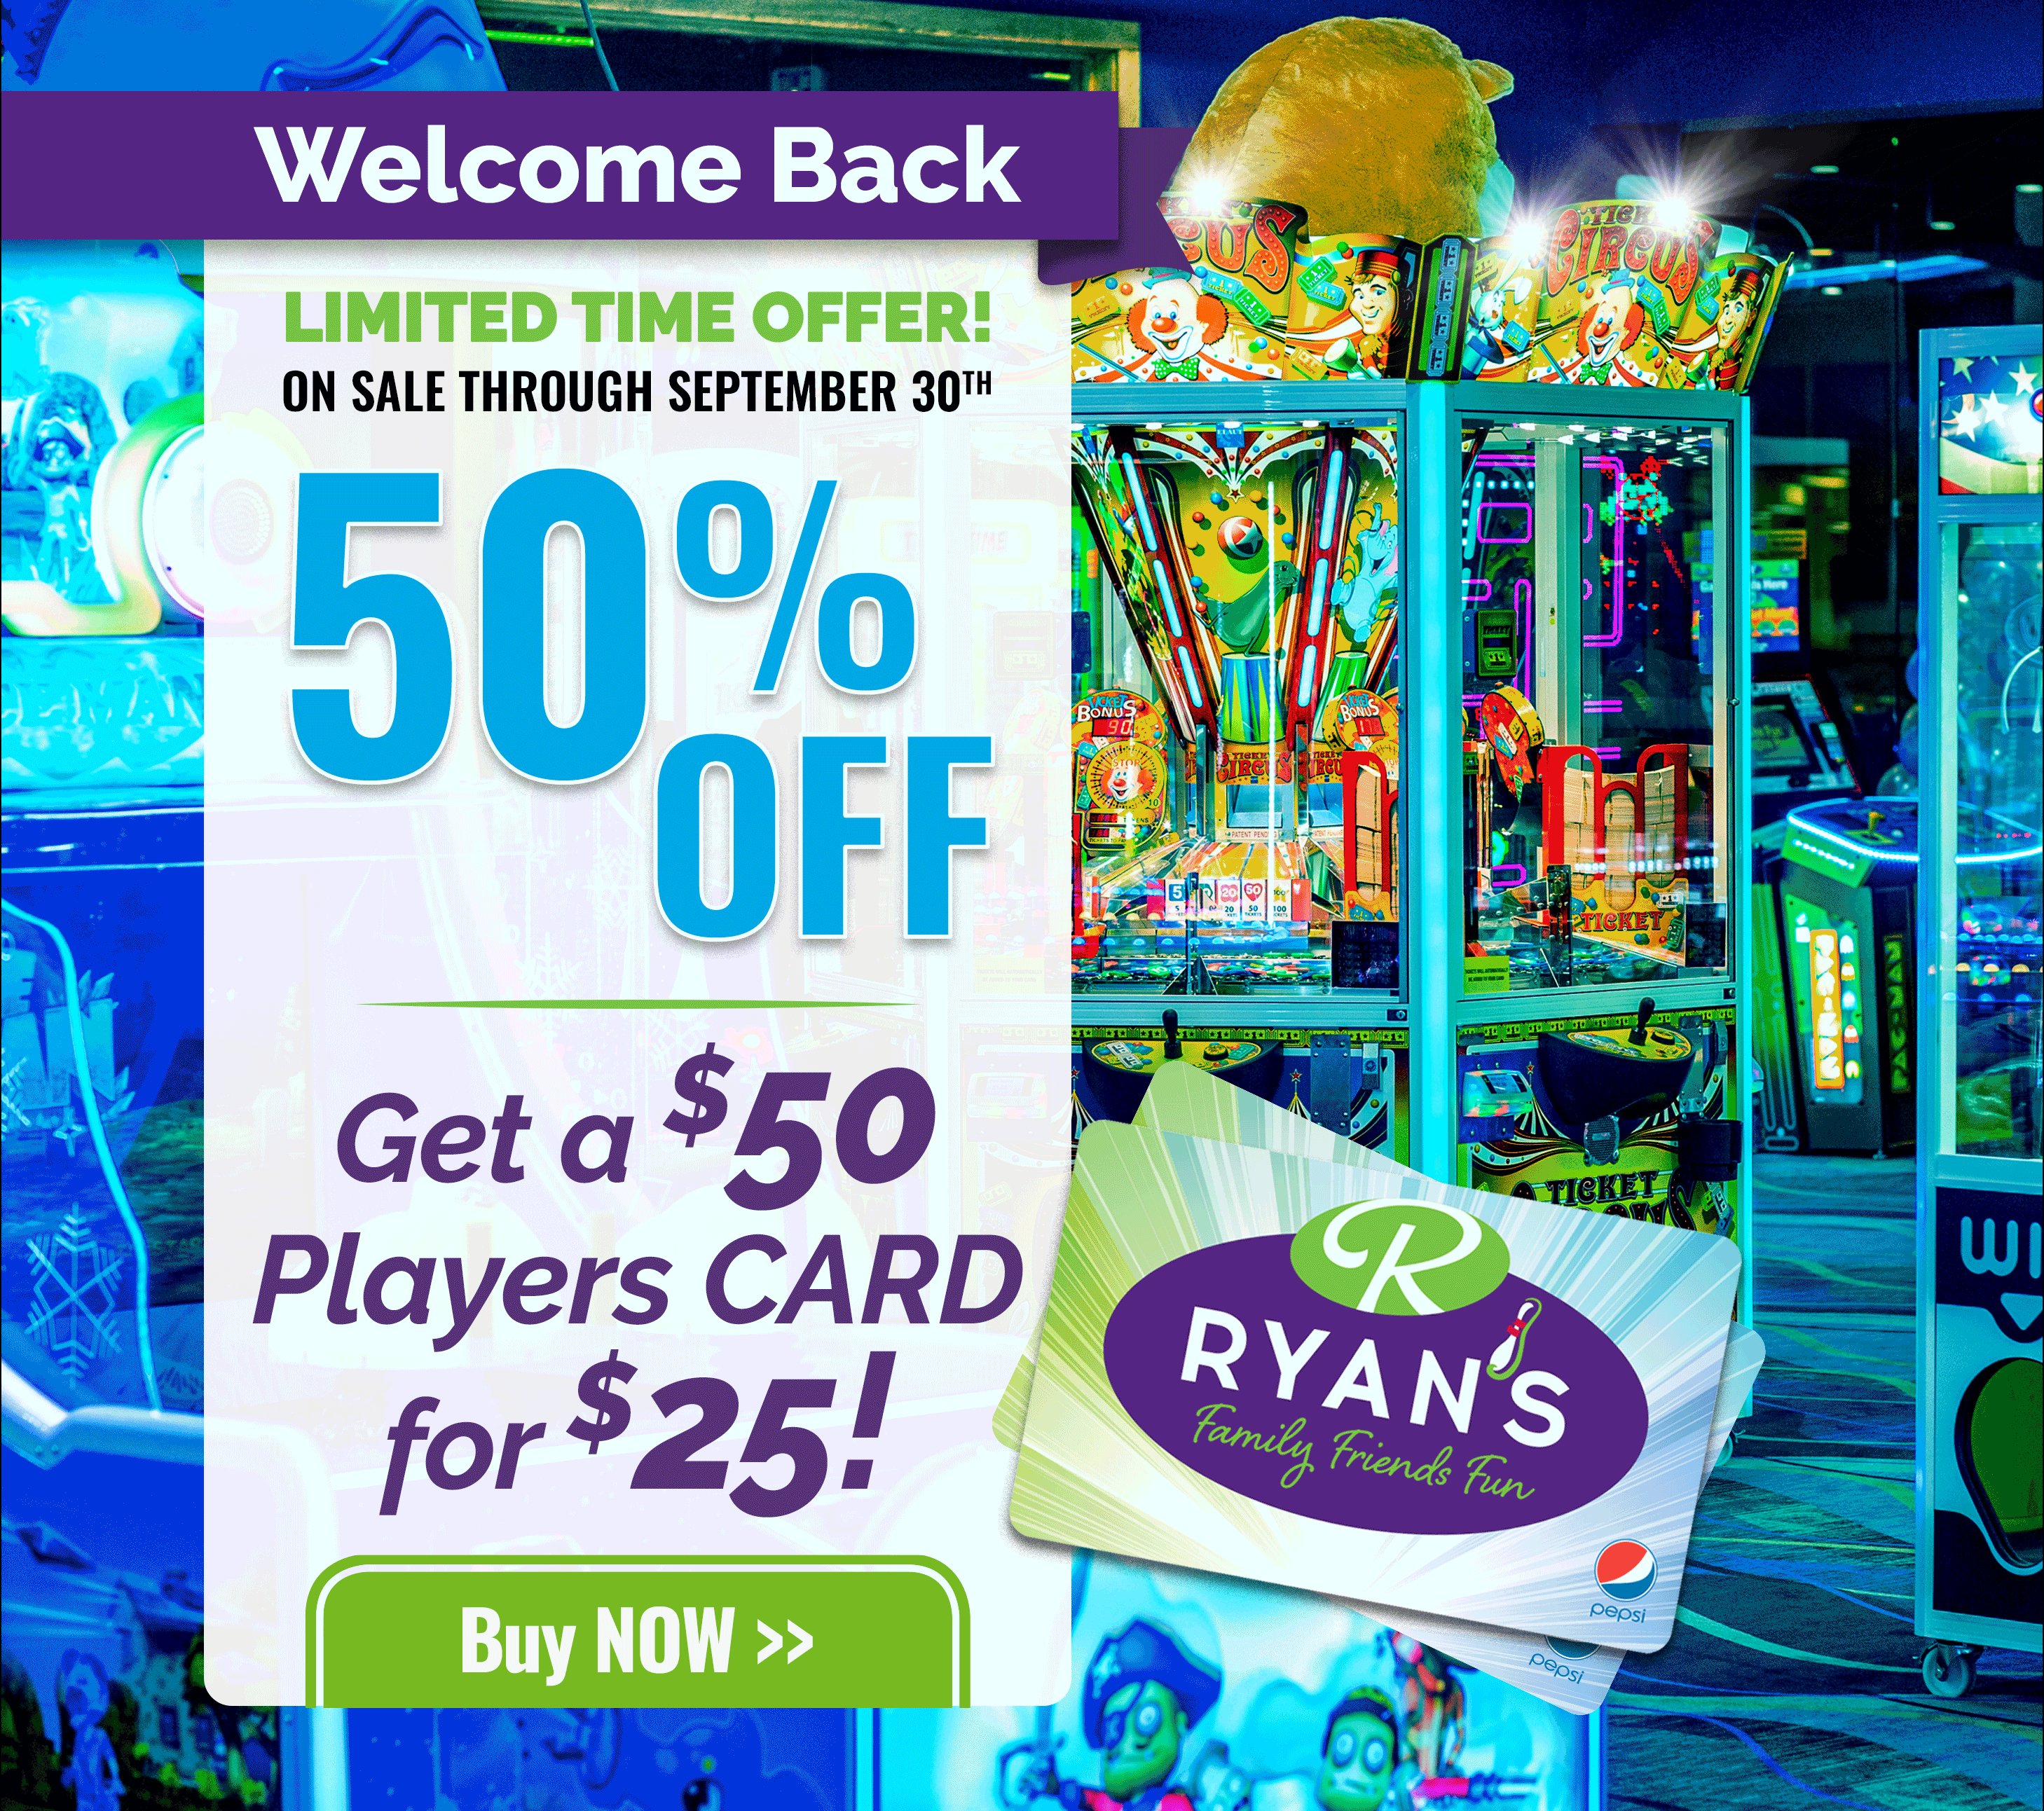 RYAN'S Family Friends Fun | Welcome Back | LIMITED TIME OFFER! ON SALE THROUGH SEPTEMBER 30TH | 50% OFF | Get a $50 players card for $25! | Buy NOW